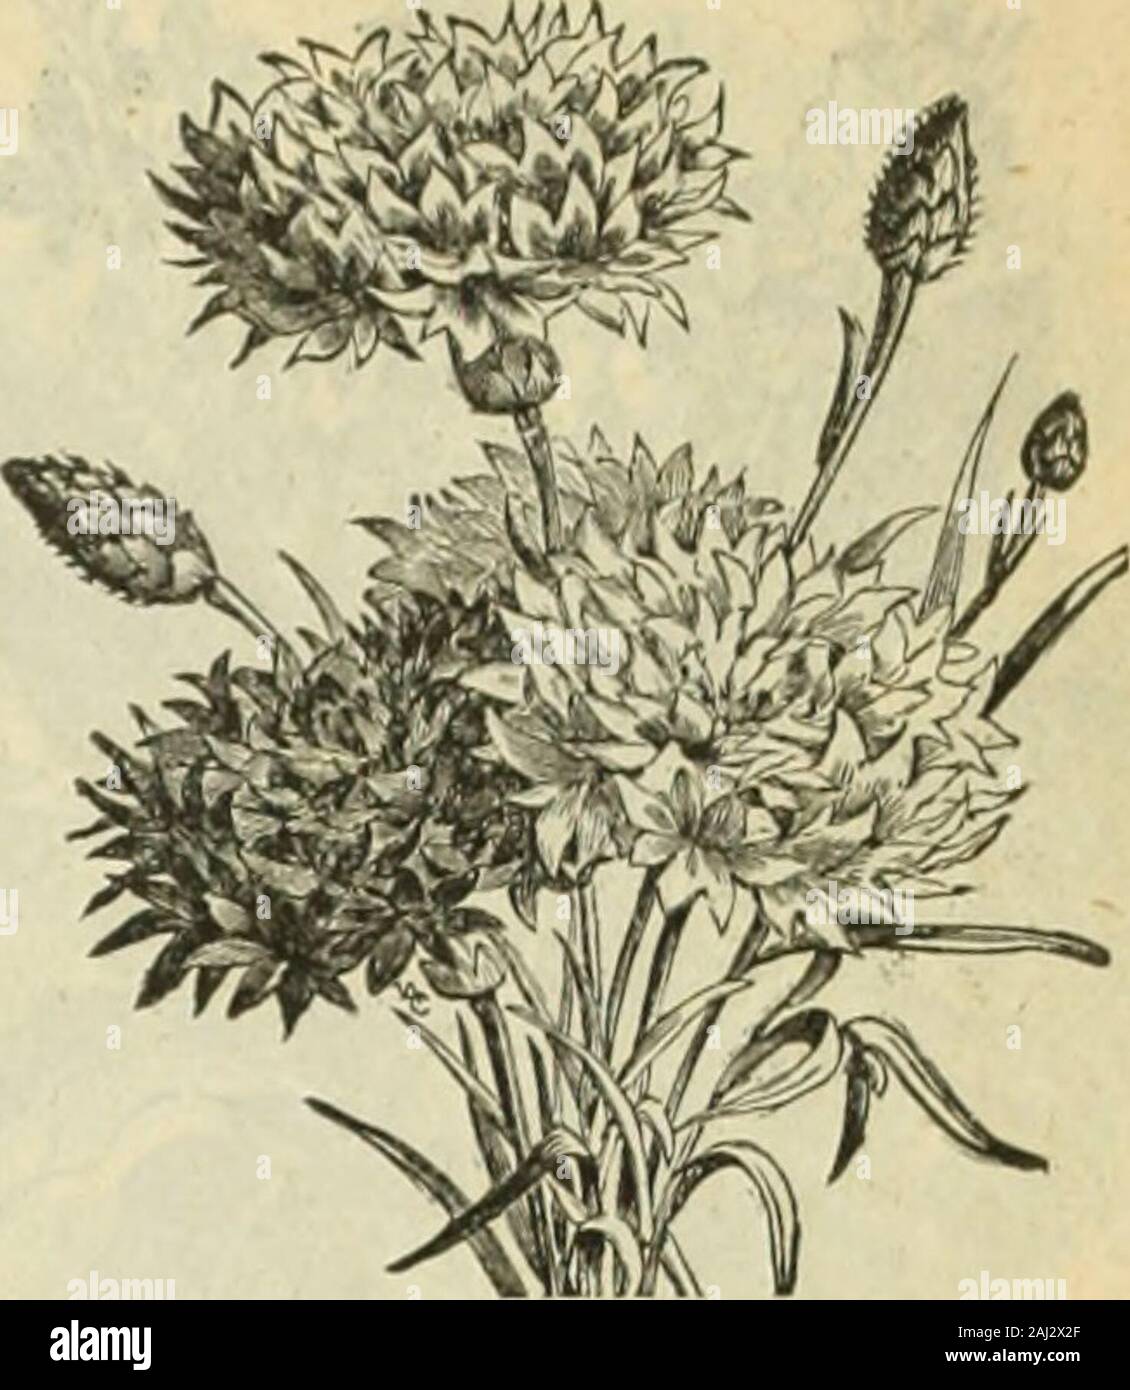 Seed annual . CENTAUREA CYANUS. or BACHELORS BUTTON. (Corn Flower, Blue Bottle, Ragged5ailor, etc.)—Vit.v old favorite hardyauiniftl; llowers freely in almost anysituation; for vwX. flowers they arelarselv used both in Kurope and thiscountry, a little l&gt;unch of the blue CoruFlower being a favorite boutouniere. Cyanus—Pior White; very fine -5 Cyanus— Bhifl, or Empmrr Flomr. Fine Kieh bine 5 Bachelors Button—A ehoiee mixture... 5New Centaurea, Marguerite—A beauti-lul new annual. It is the handsomestCi-ntaurea known and shonlii be [ilant-ed in every garden. The plants growabout lifteen inclu-s Stock Photo